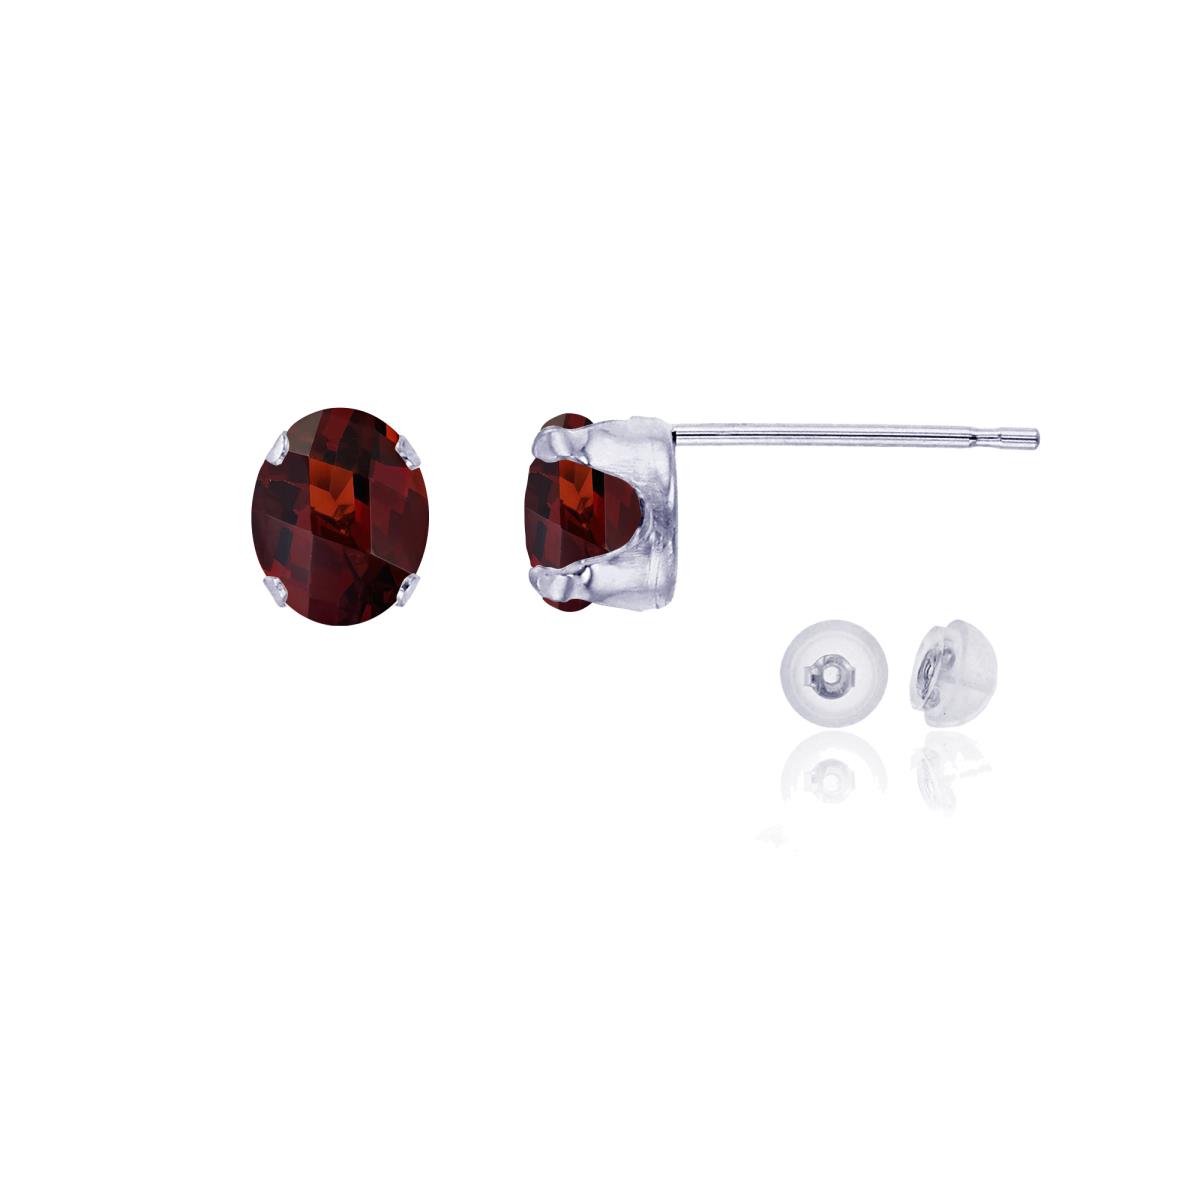 10K White Gold 6x4mm Oval Garnet Stud Earring with Silicone Back